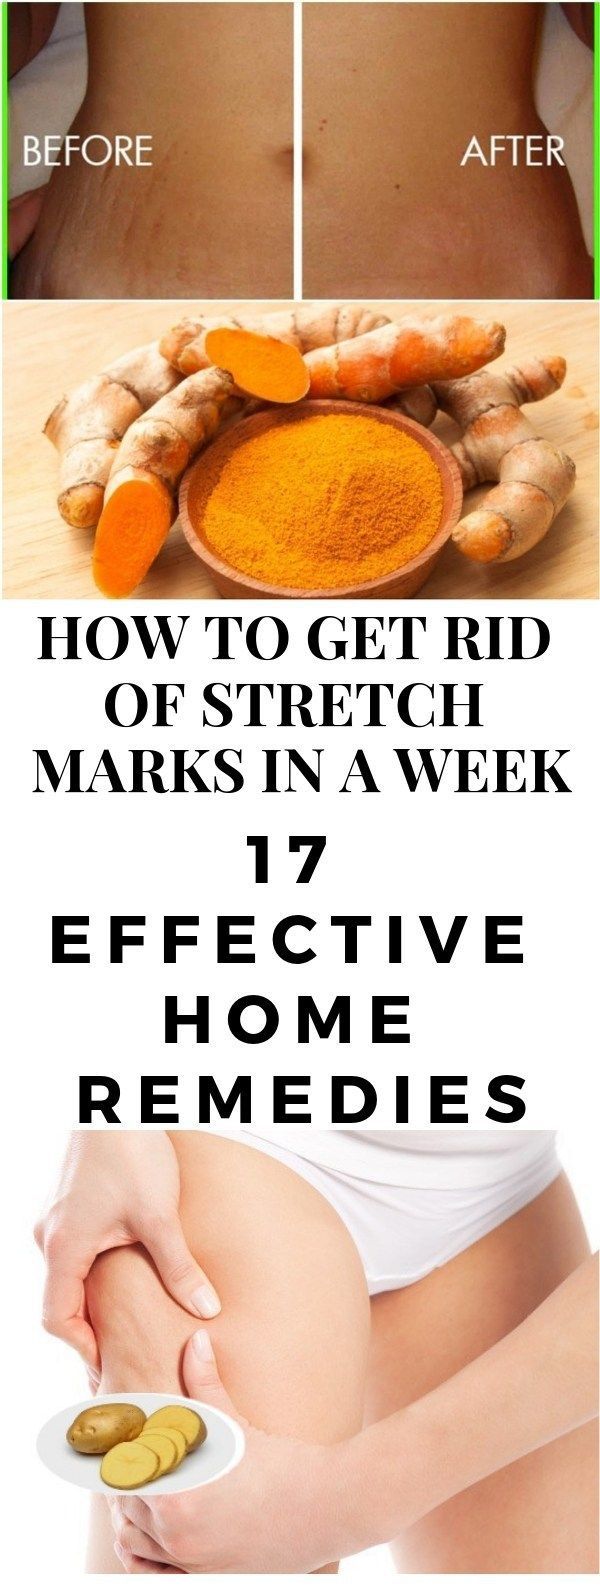 HOW TO GET RID OF STRETCH MARKS IN A WEEK -   9 skin care Beauty how to get ideas